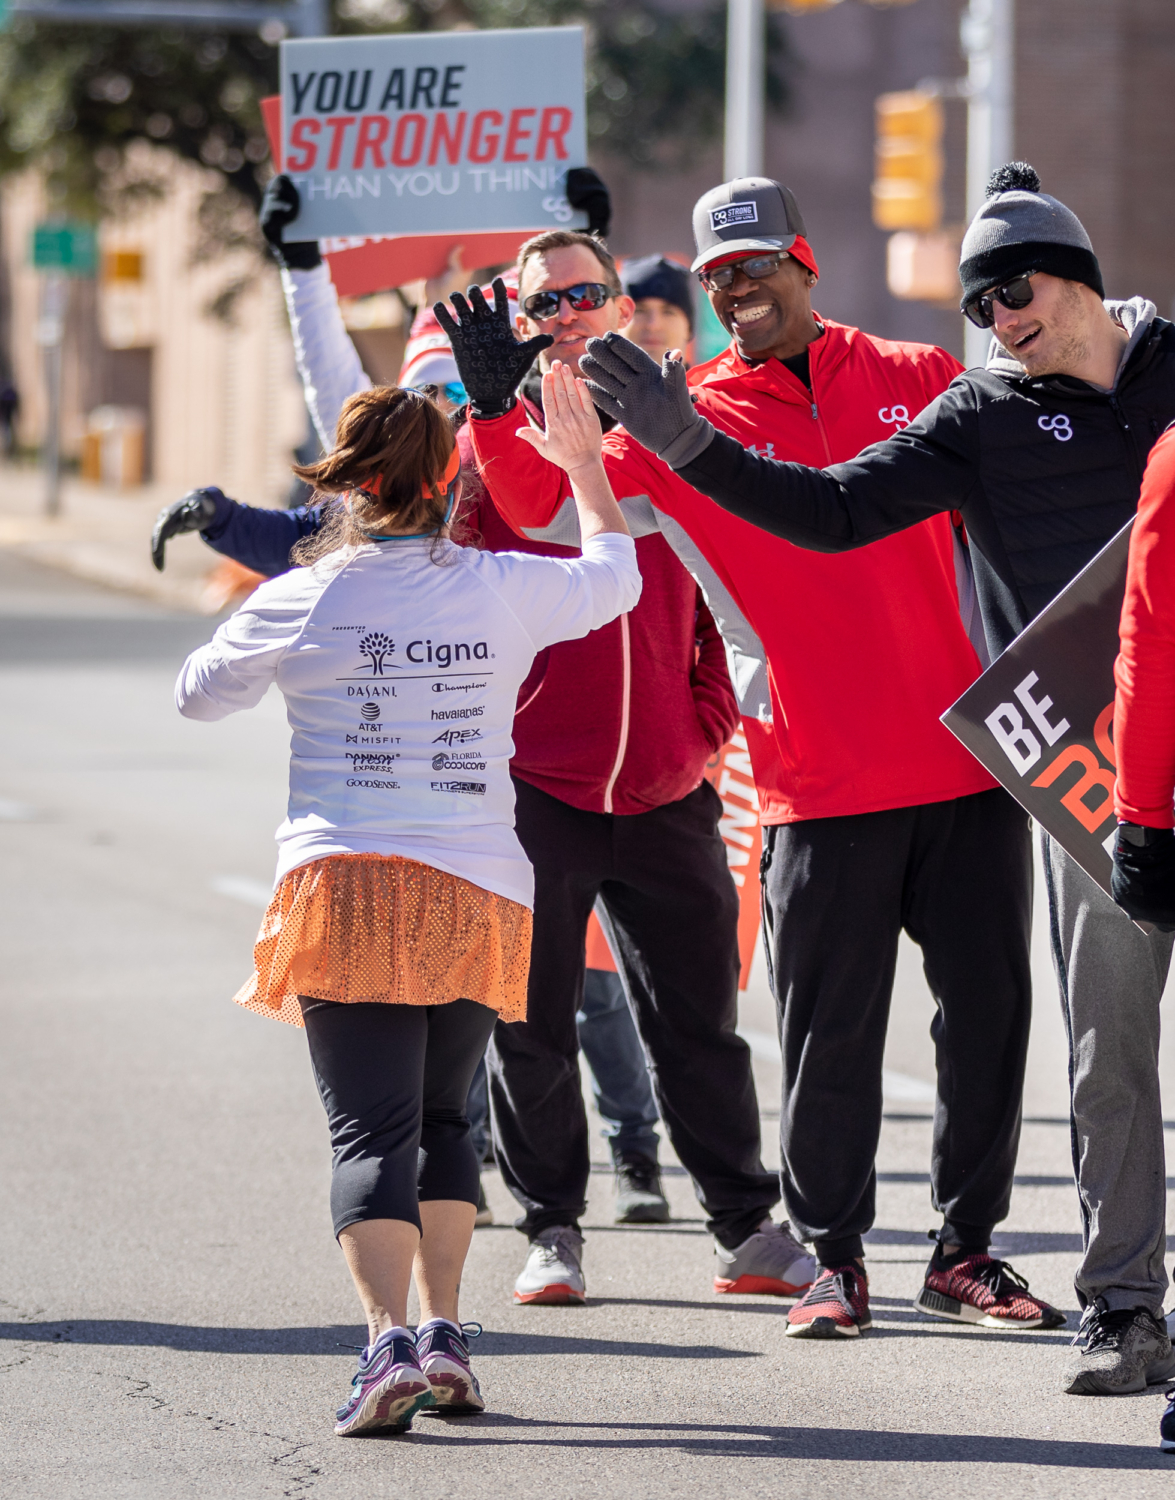 CG trainers cheer on runners at the 2019 3M Half Marathon. Expand your summer training with Camp Gladiator trainers!